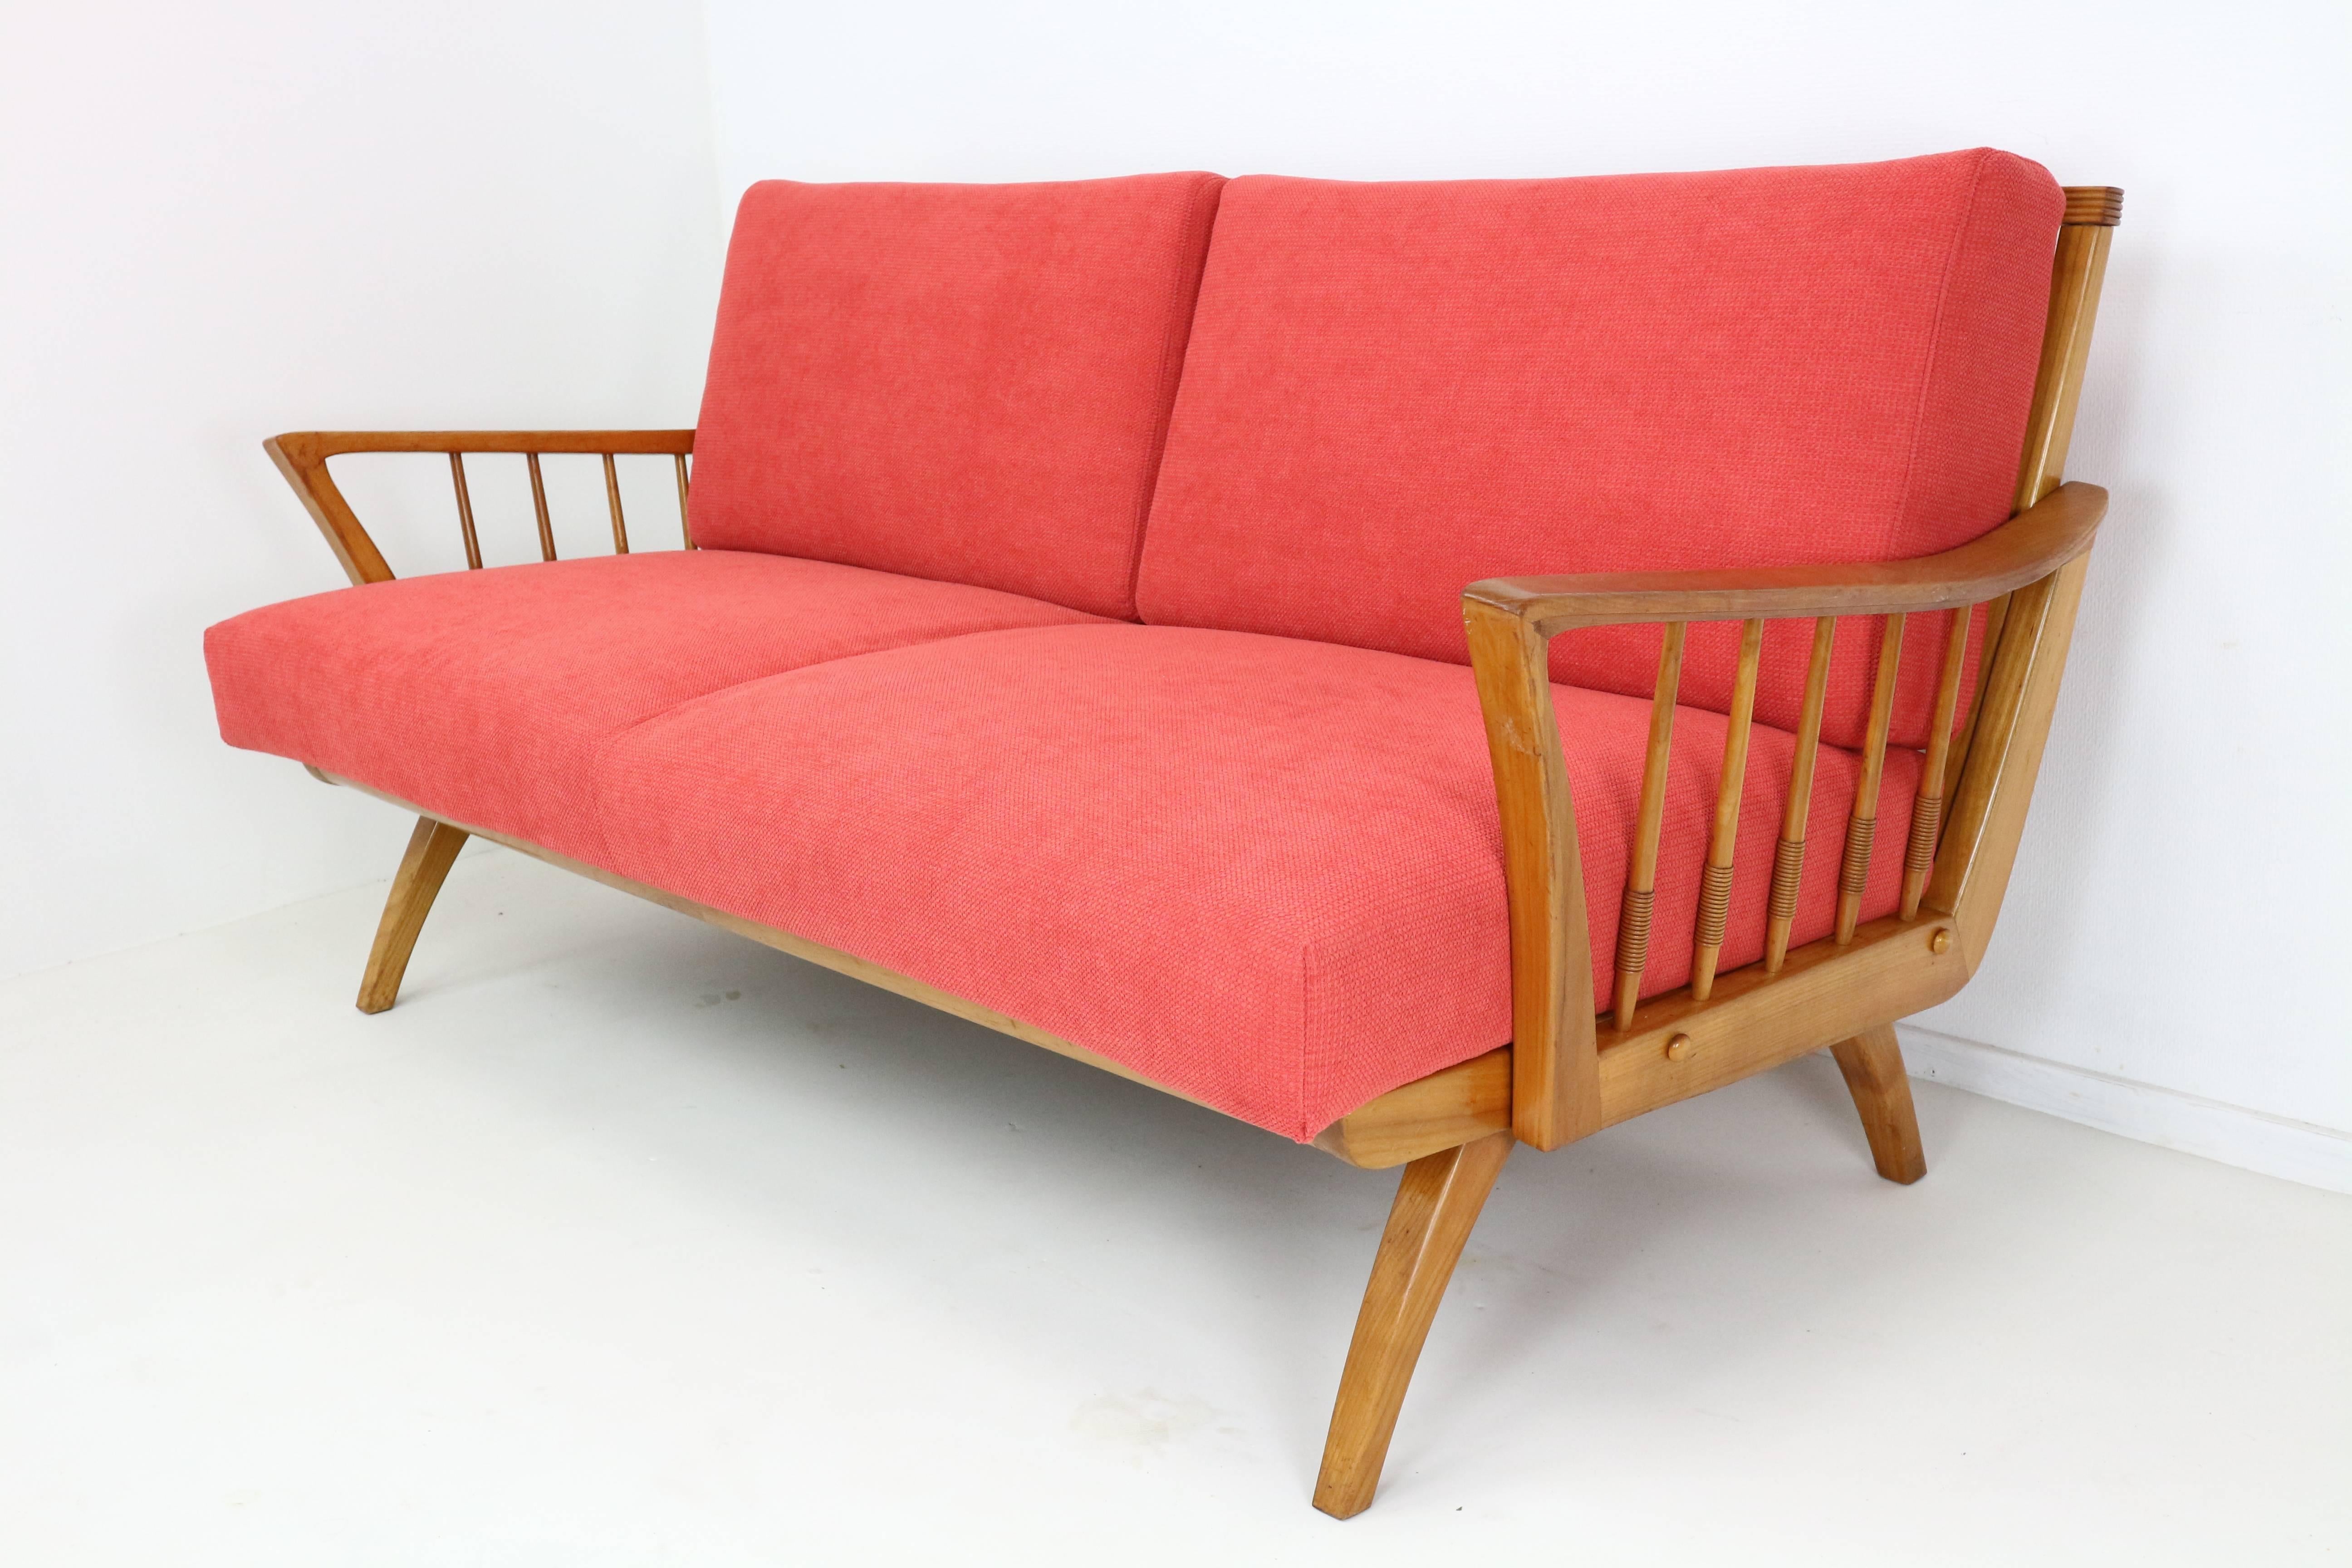 Mid-Century Modern Rare 1950s Sofa and Daybed by Walter Knoll for Antimott, New Upholstered